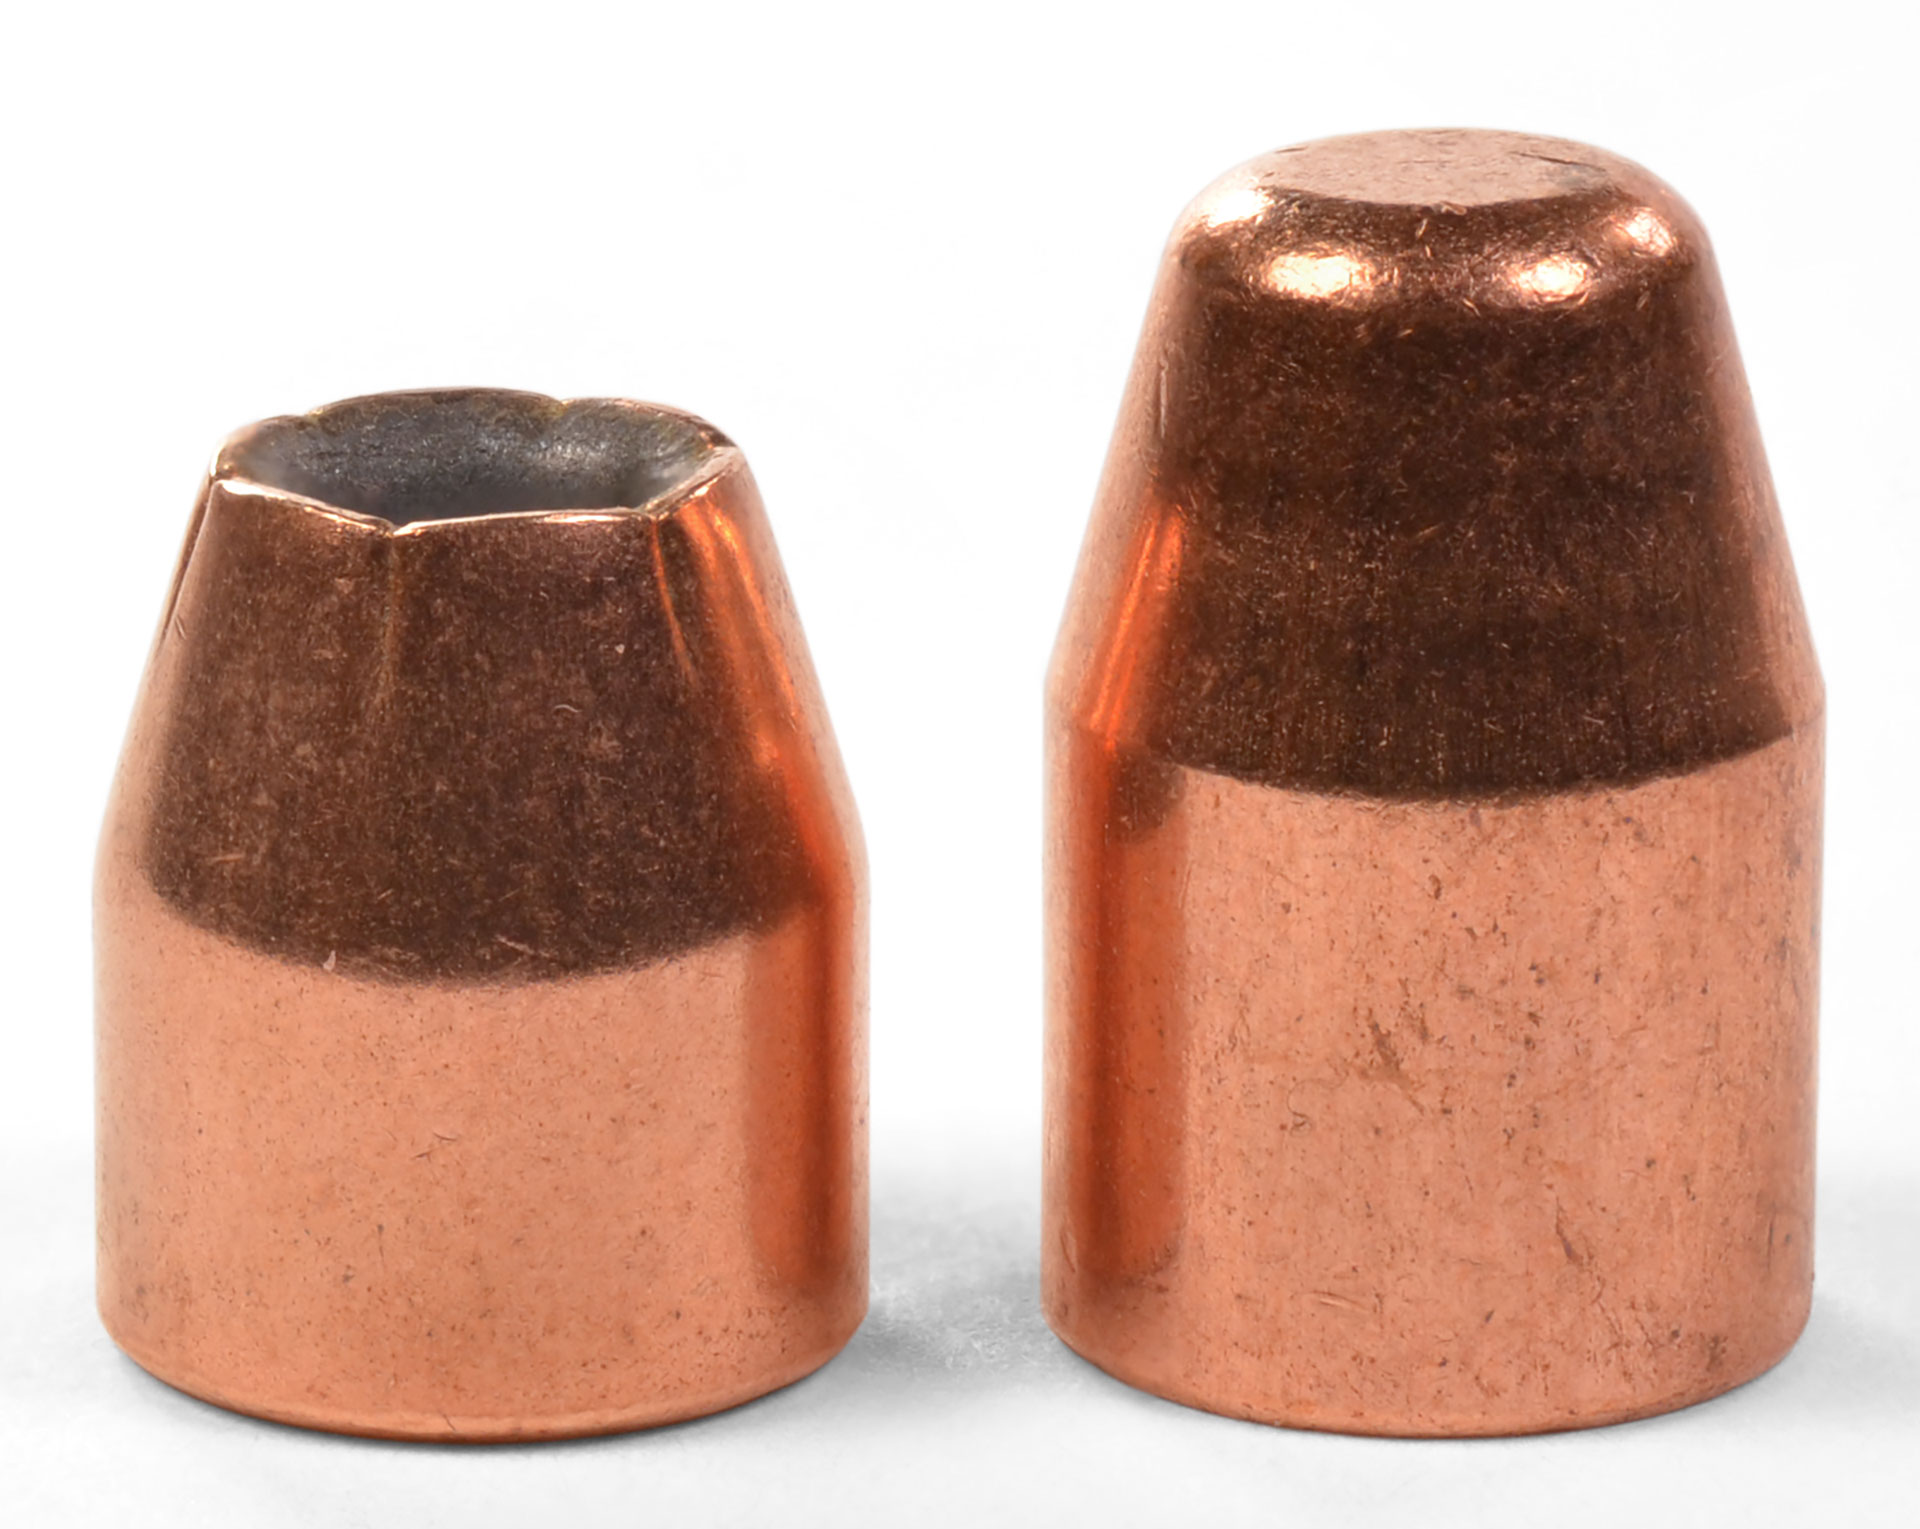 Bullets used for duplicating Super Cooper performance. A Sierra 90 grain JHP (left) and Hornady 124 grain FMJ FP.